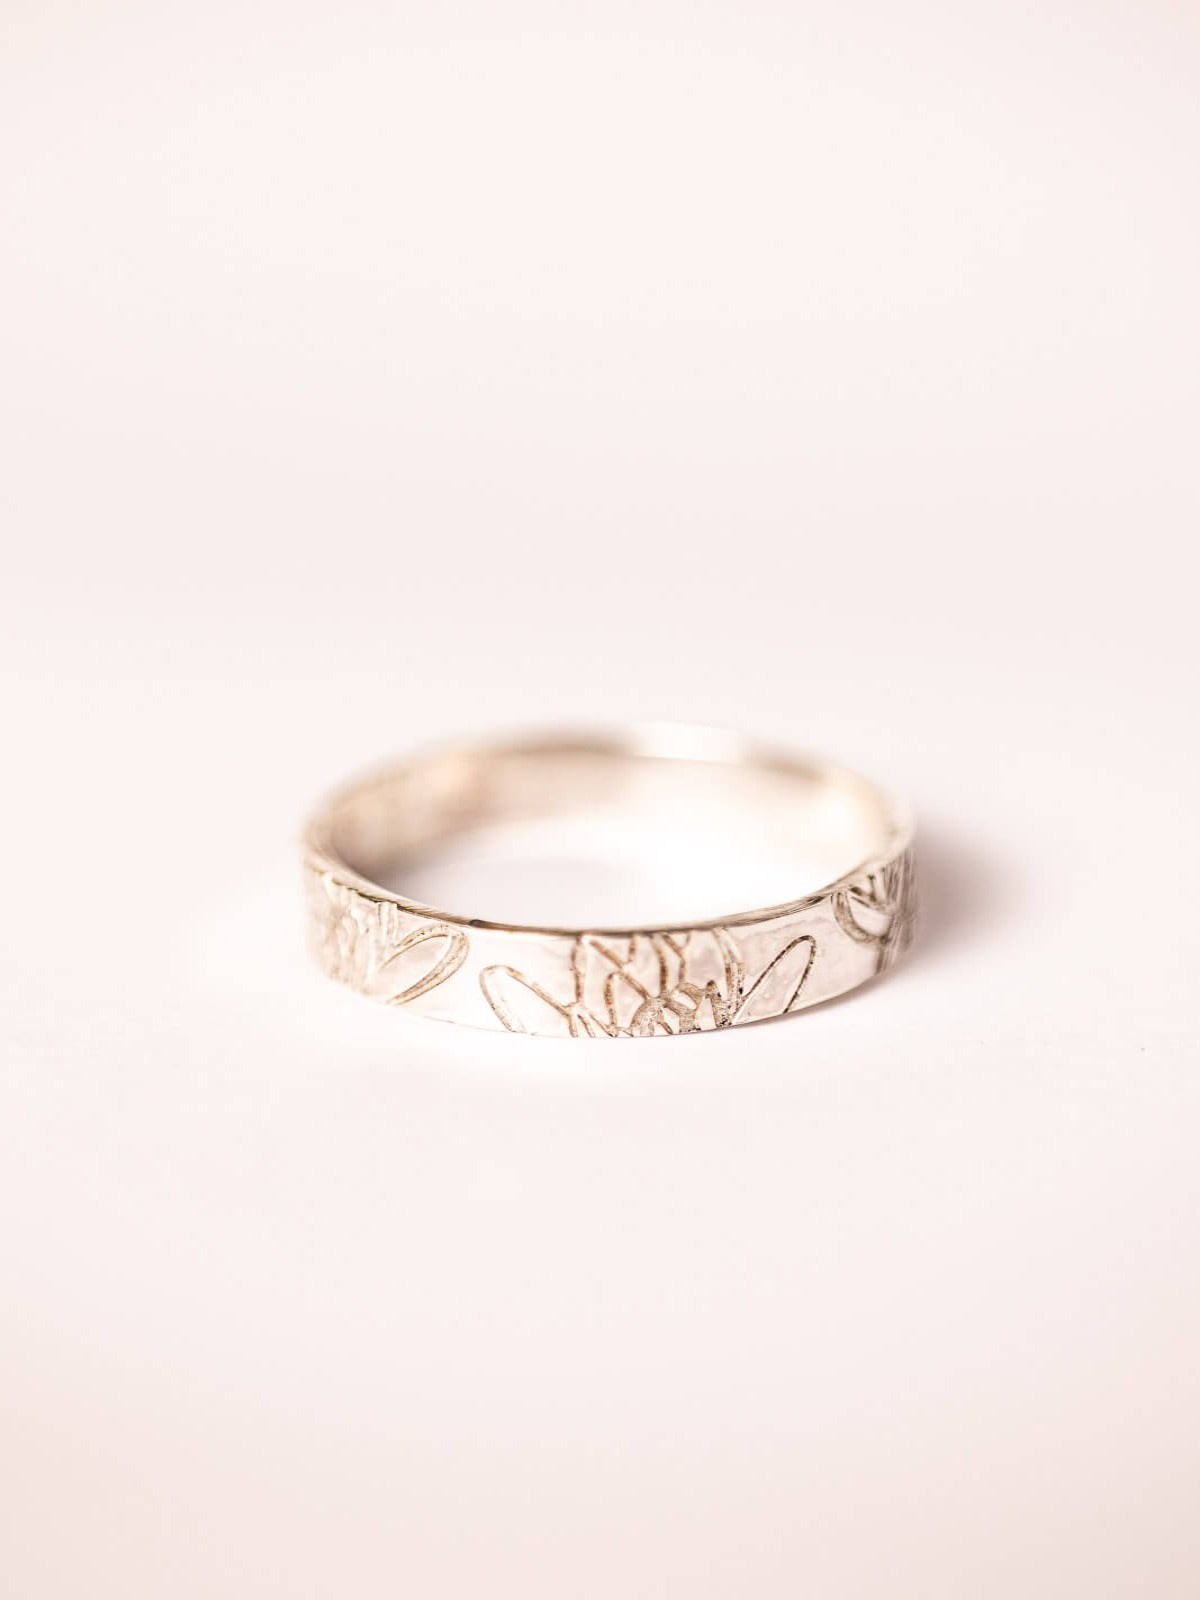 sterling silver band rings with symbols sterling silver band rings with symbols on finger sterling silver band rings with symbols worn sterling silver symbols band rings sterling silver symbols rings on held Sterling Silver thin symbols band ring waterlily ring